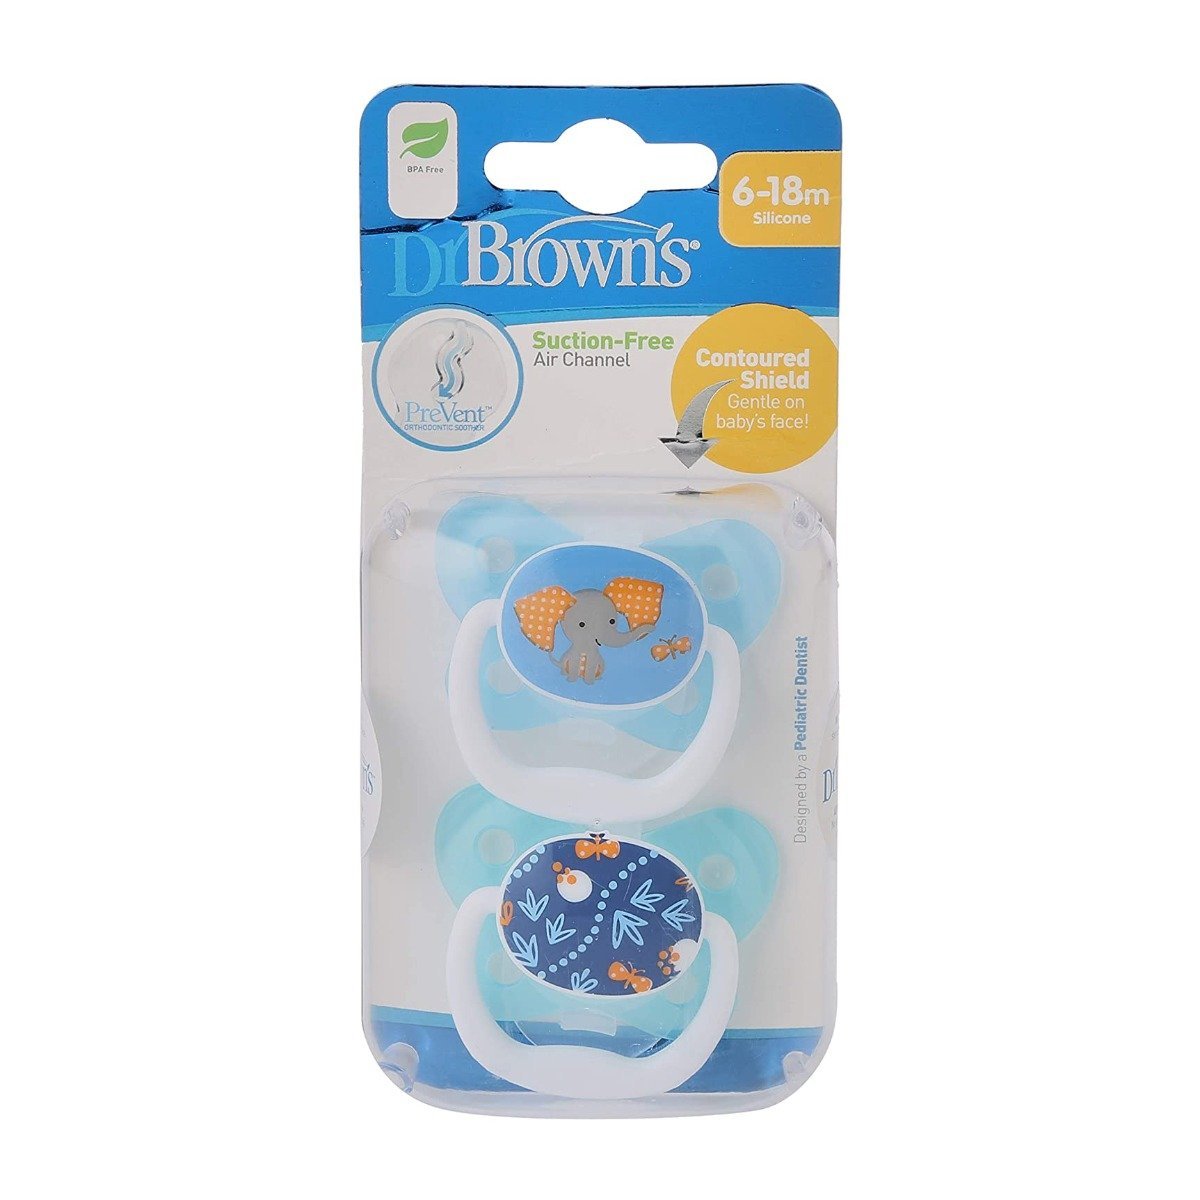 Dr. Brown’s Prevent Soother Pacifier 6-18m 2psc - Blue - Bloom Pharmacy